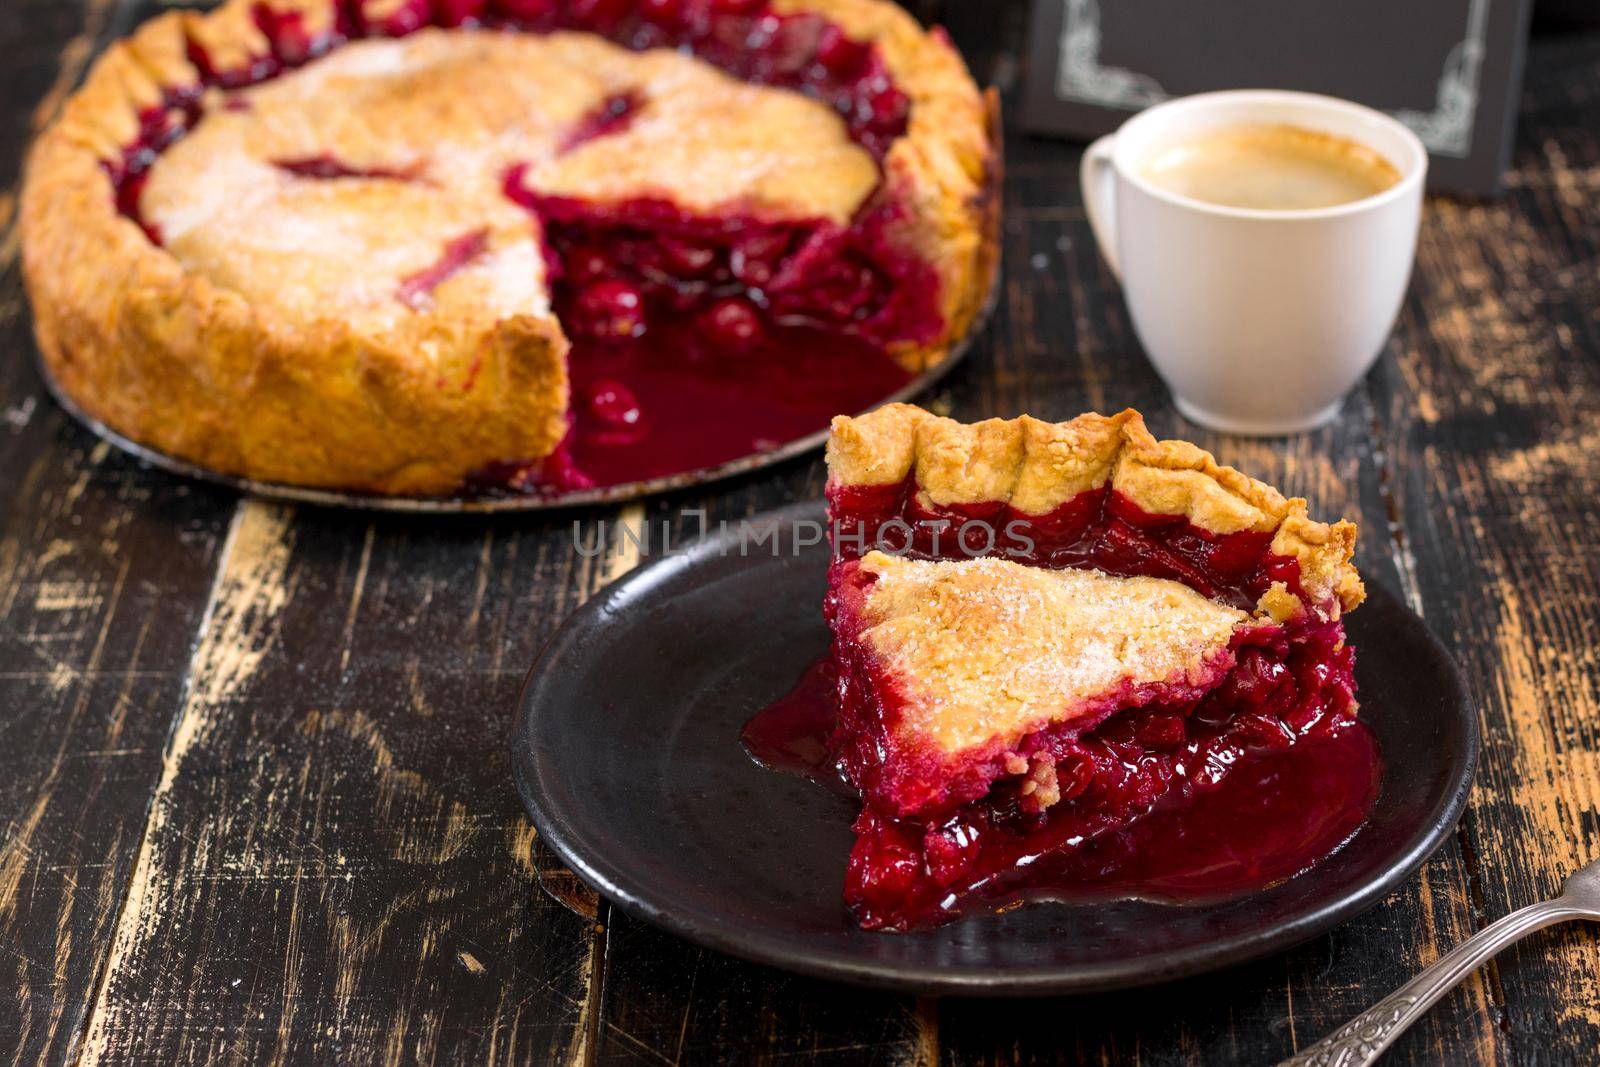 Slice of homemade cherry pie, cup of coffee, bowl with cherries and menu chalkboard on the black wooden table